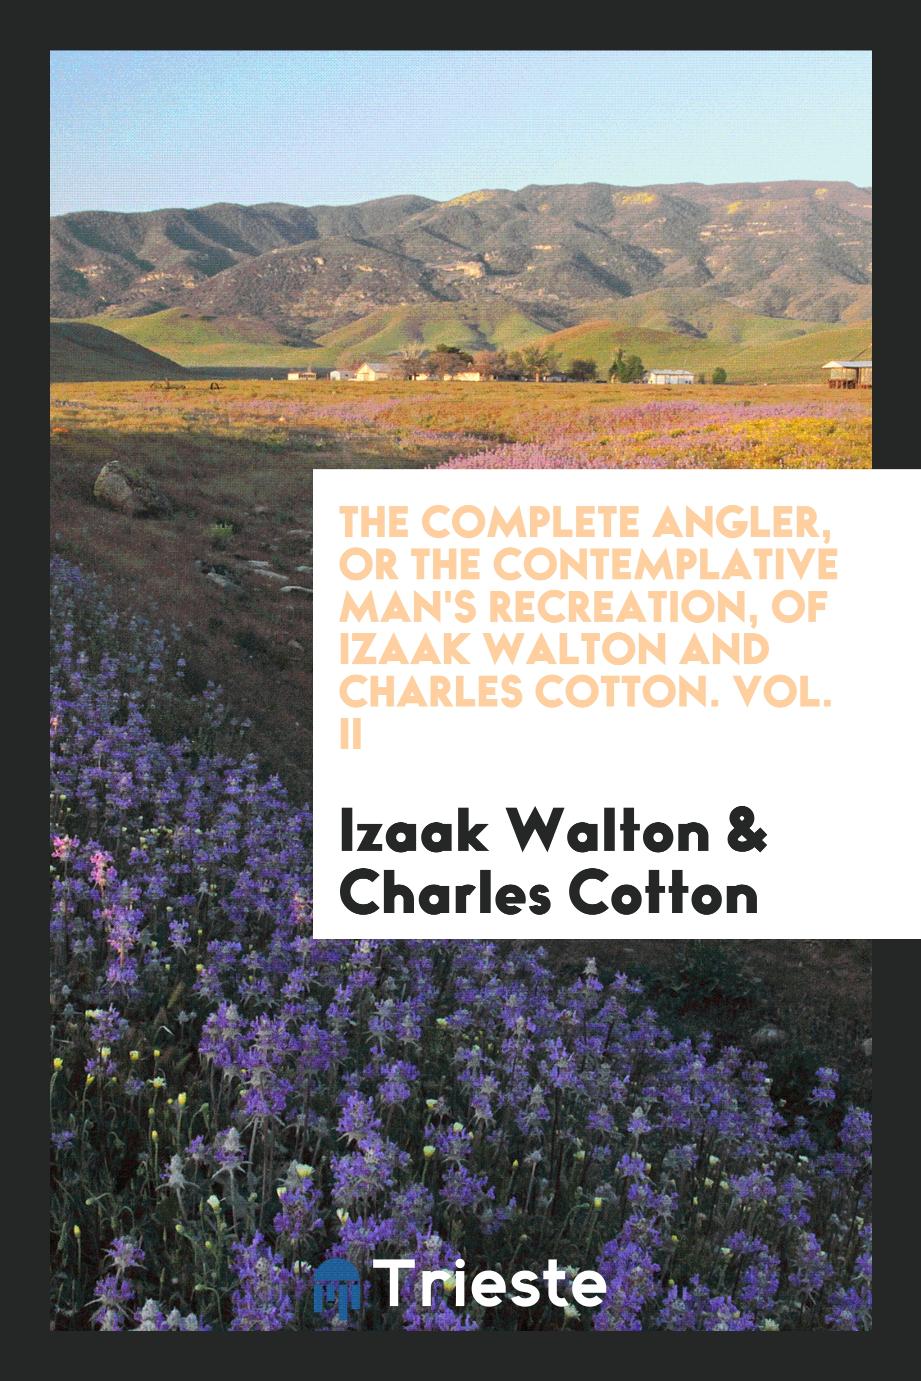 The Complete Angler, or The Contemplative Man's Recreation, of Izaak Walton and Charles Cotton. Vol. II